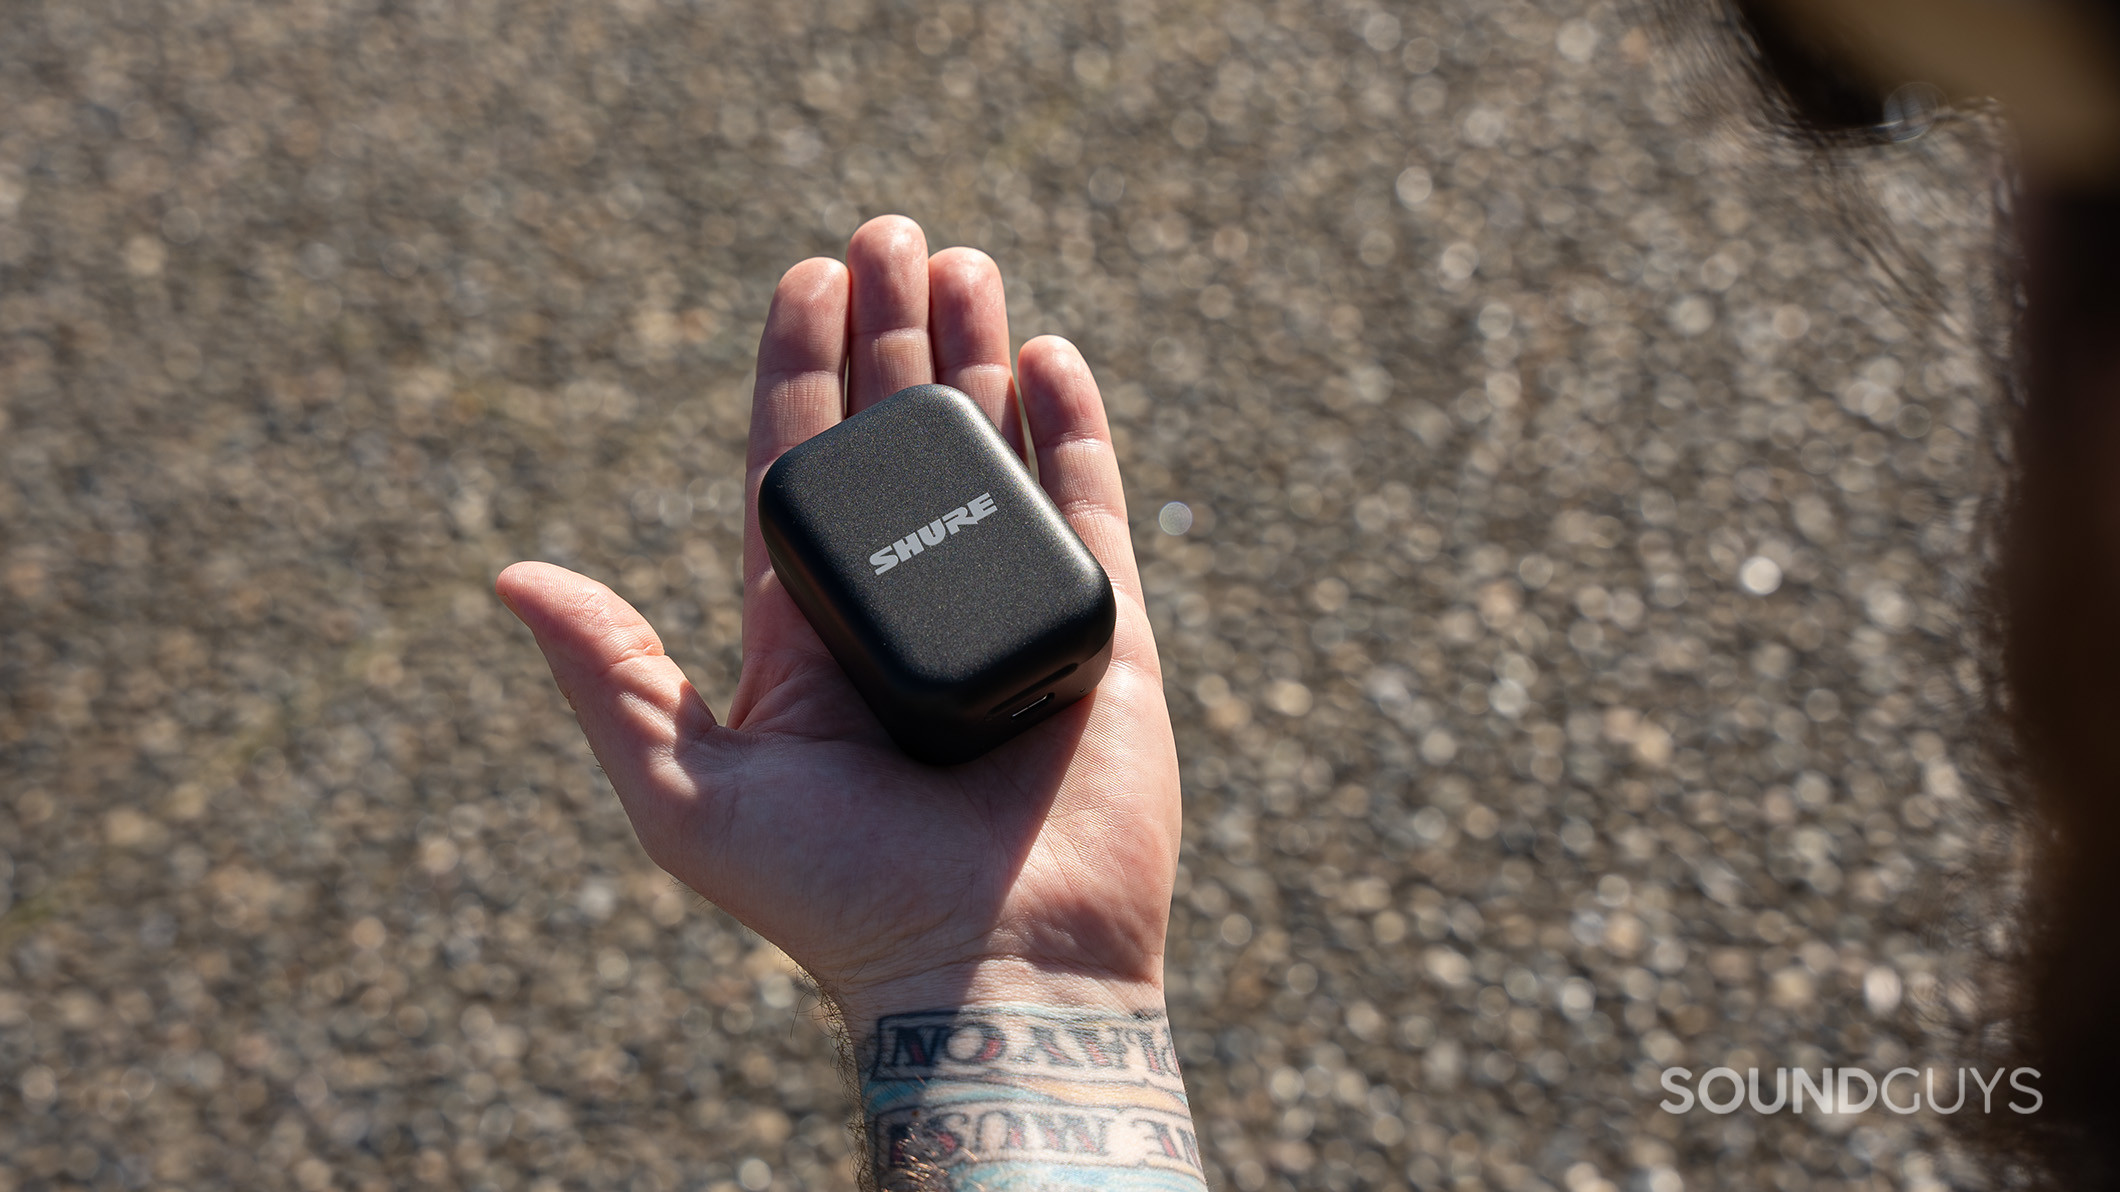 A Shure MoveMic charging case on the palm of an open hand